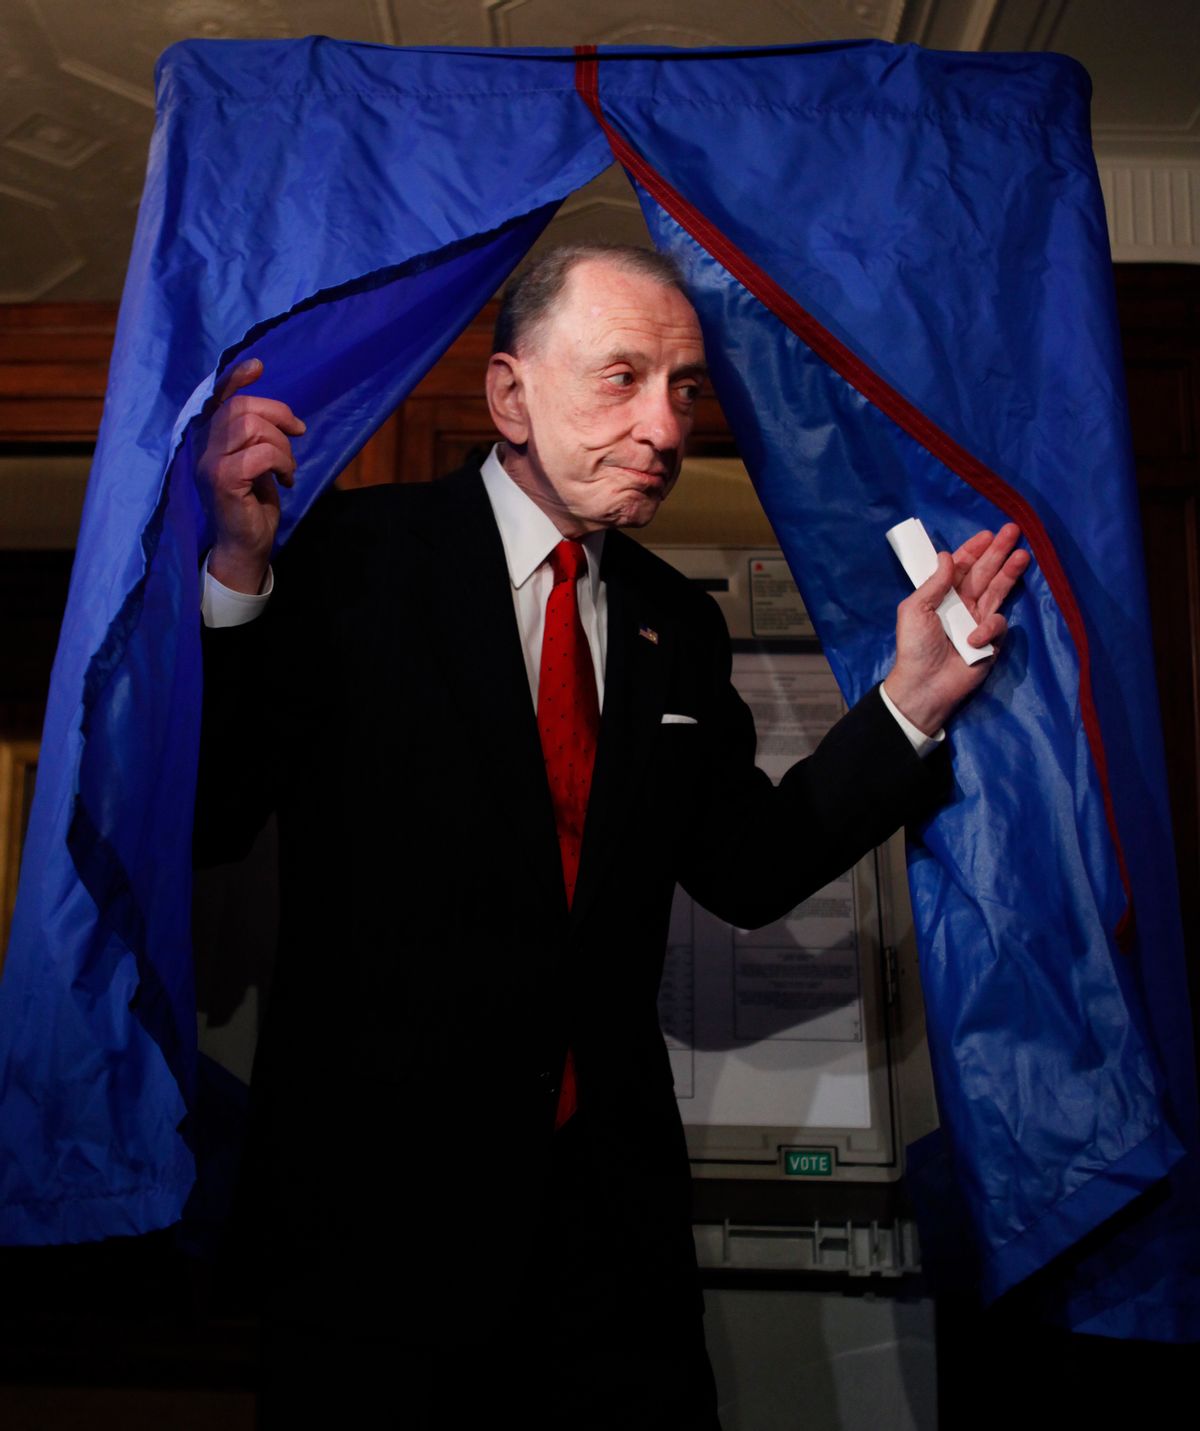 Sen. Arlen Specter, D-Pa. emerges from a voting booth after casting his vote, Tuesday, May 18, 2010, in Philadelphia. Specter is running for the Democratic nomination to run for re-election. (AP Photo/Carolyn Kaster) (Associated Press)